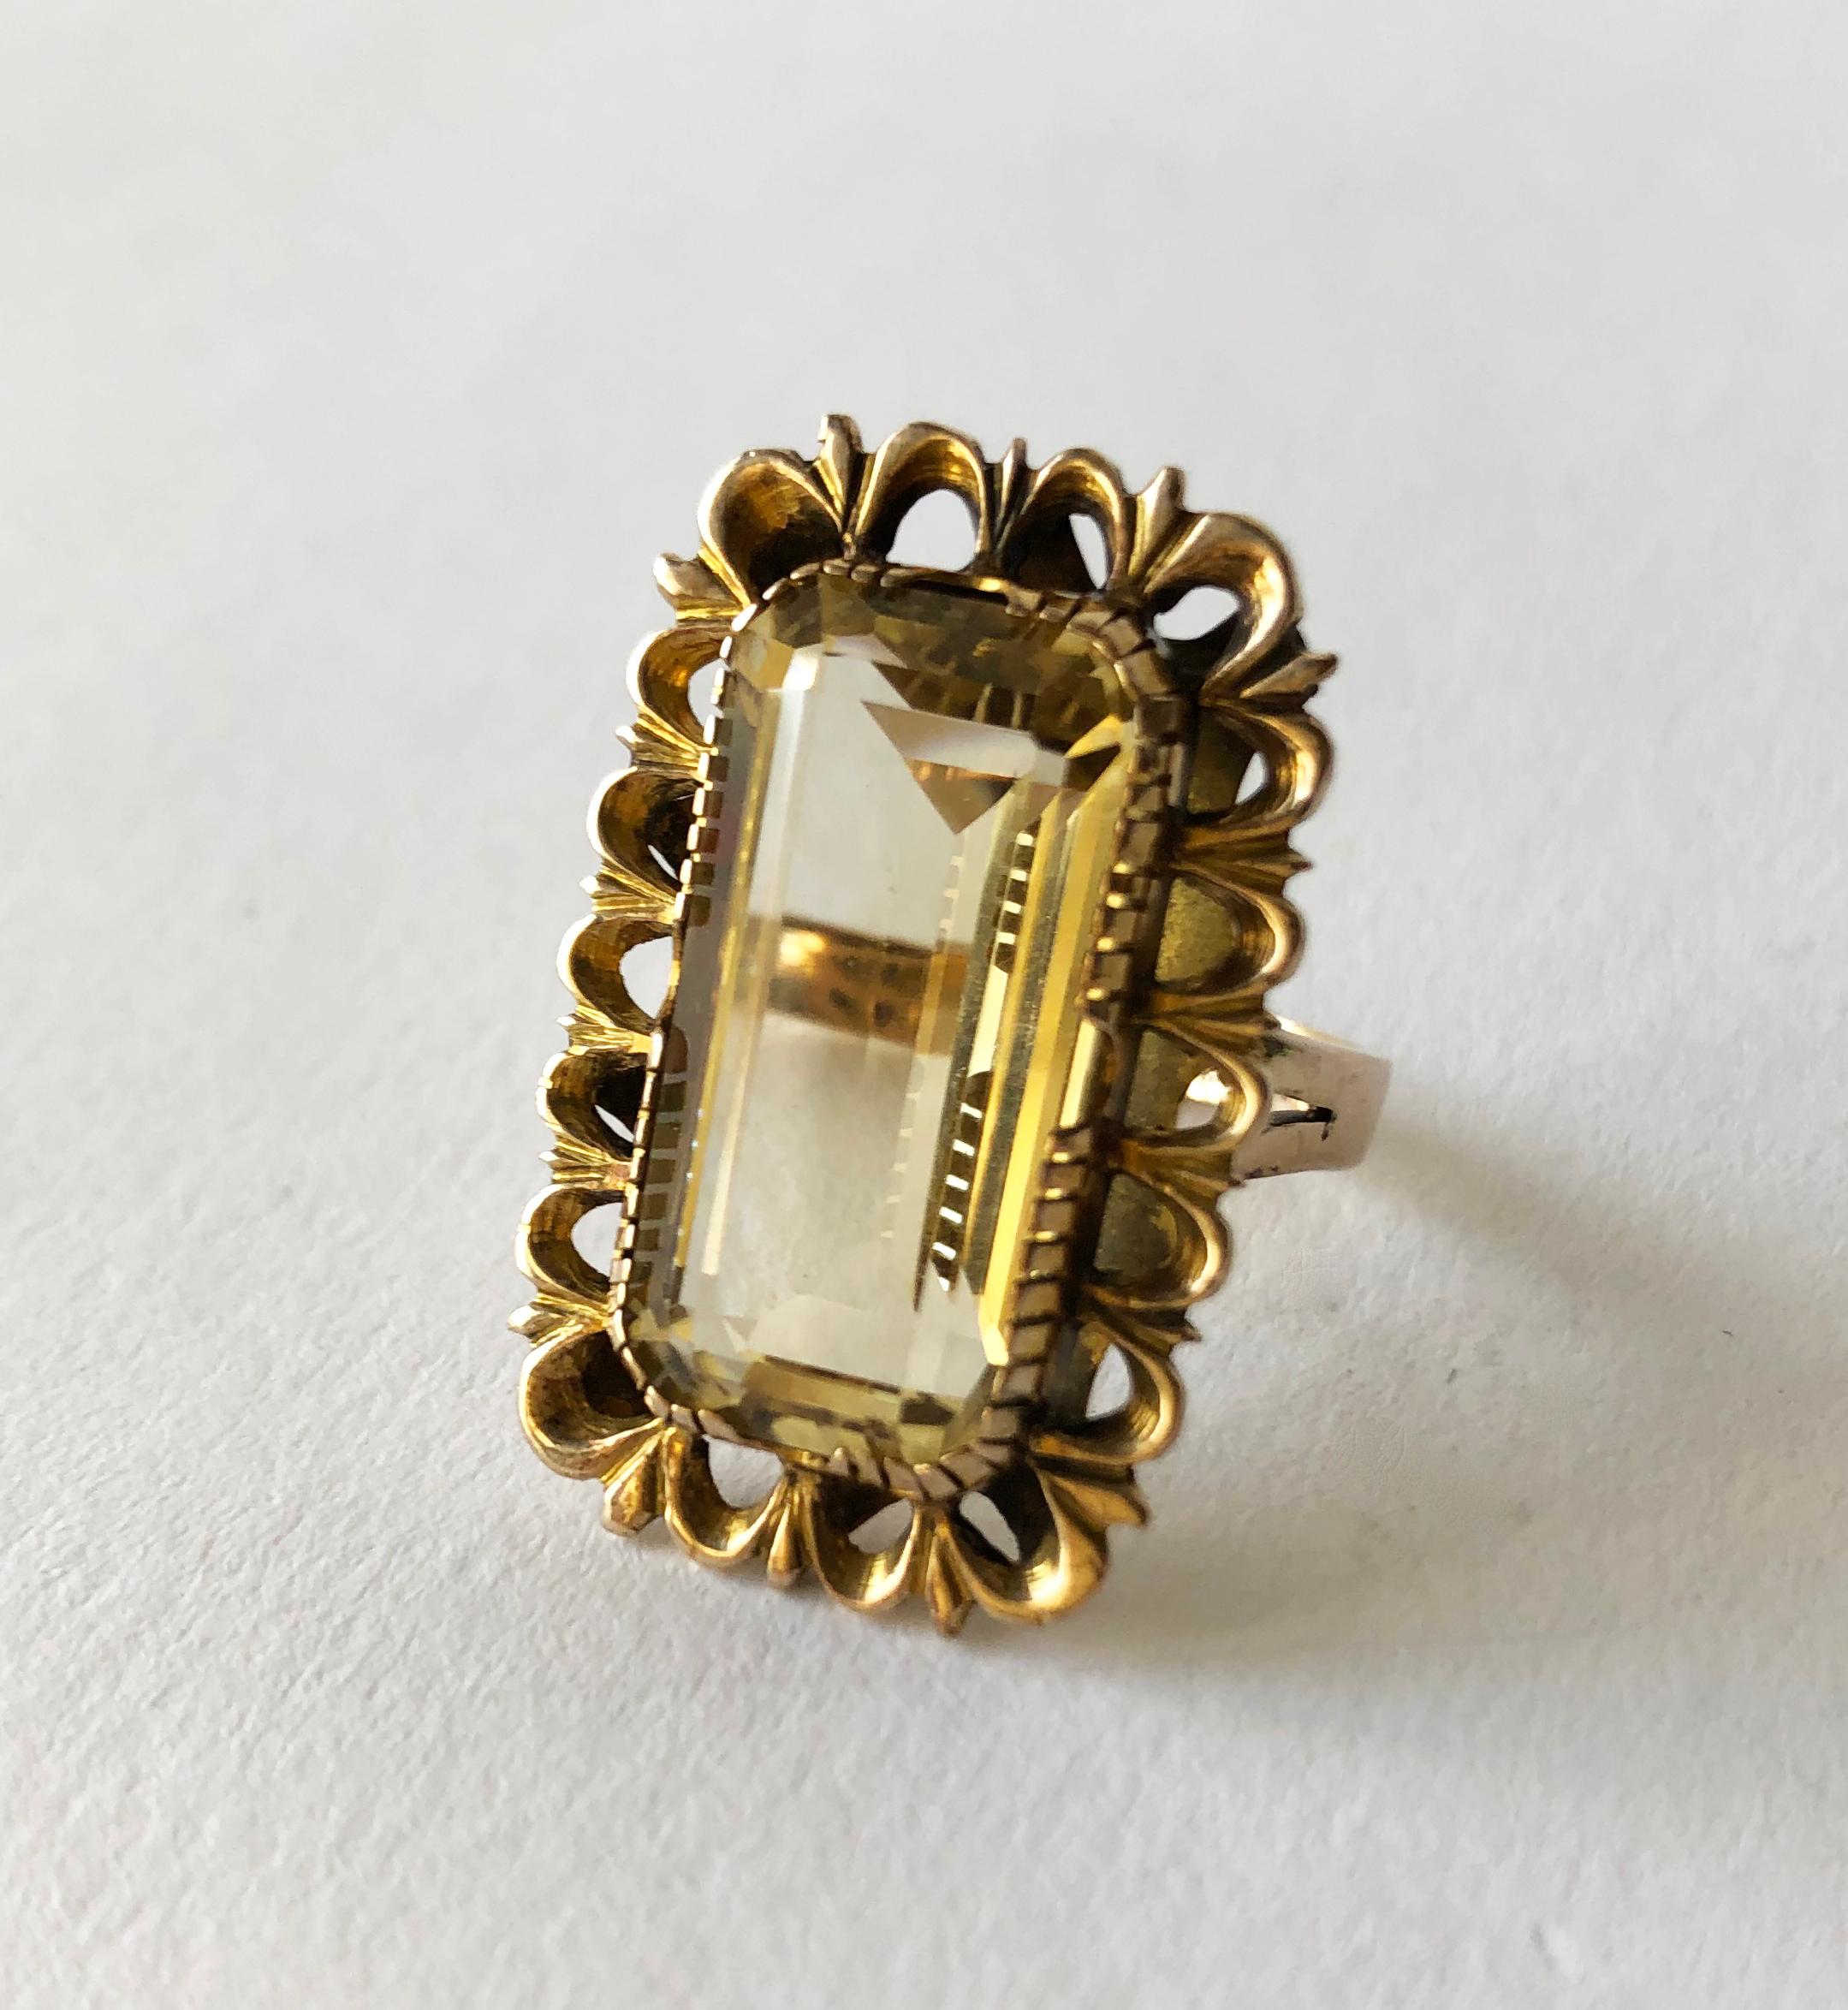 Antiqued 14k gold ring with large faceted citrine, circa 1960s.  Ring is a finger size 7 to 7.25 and is signed 14k.  In very good vintage condition. 8.8 grams.